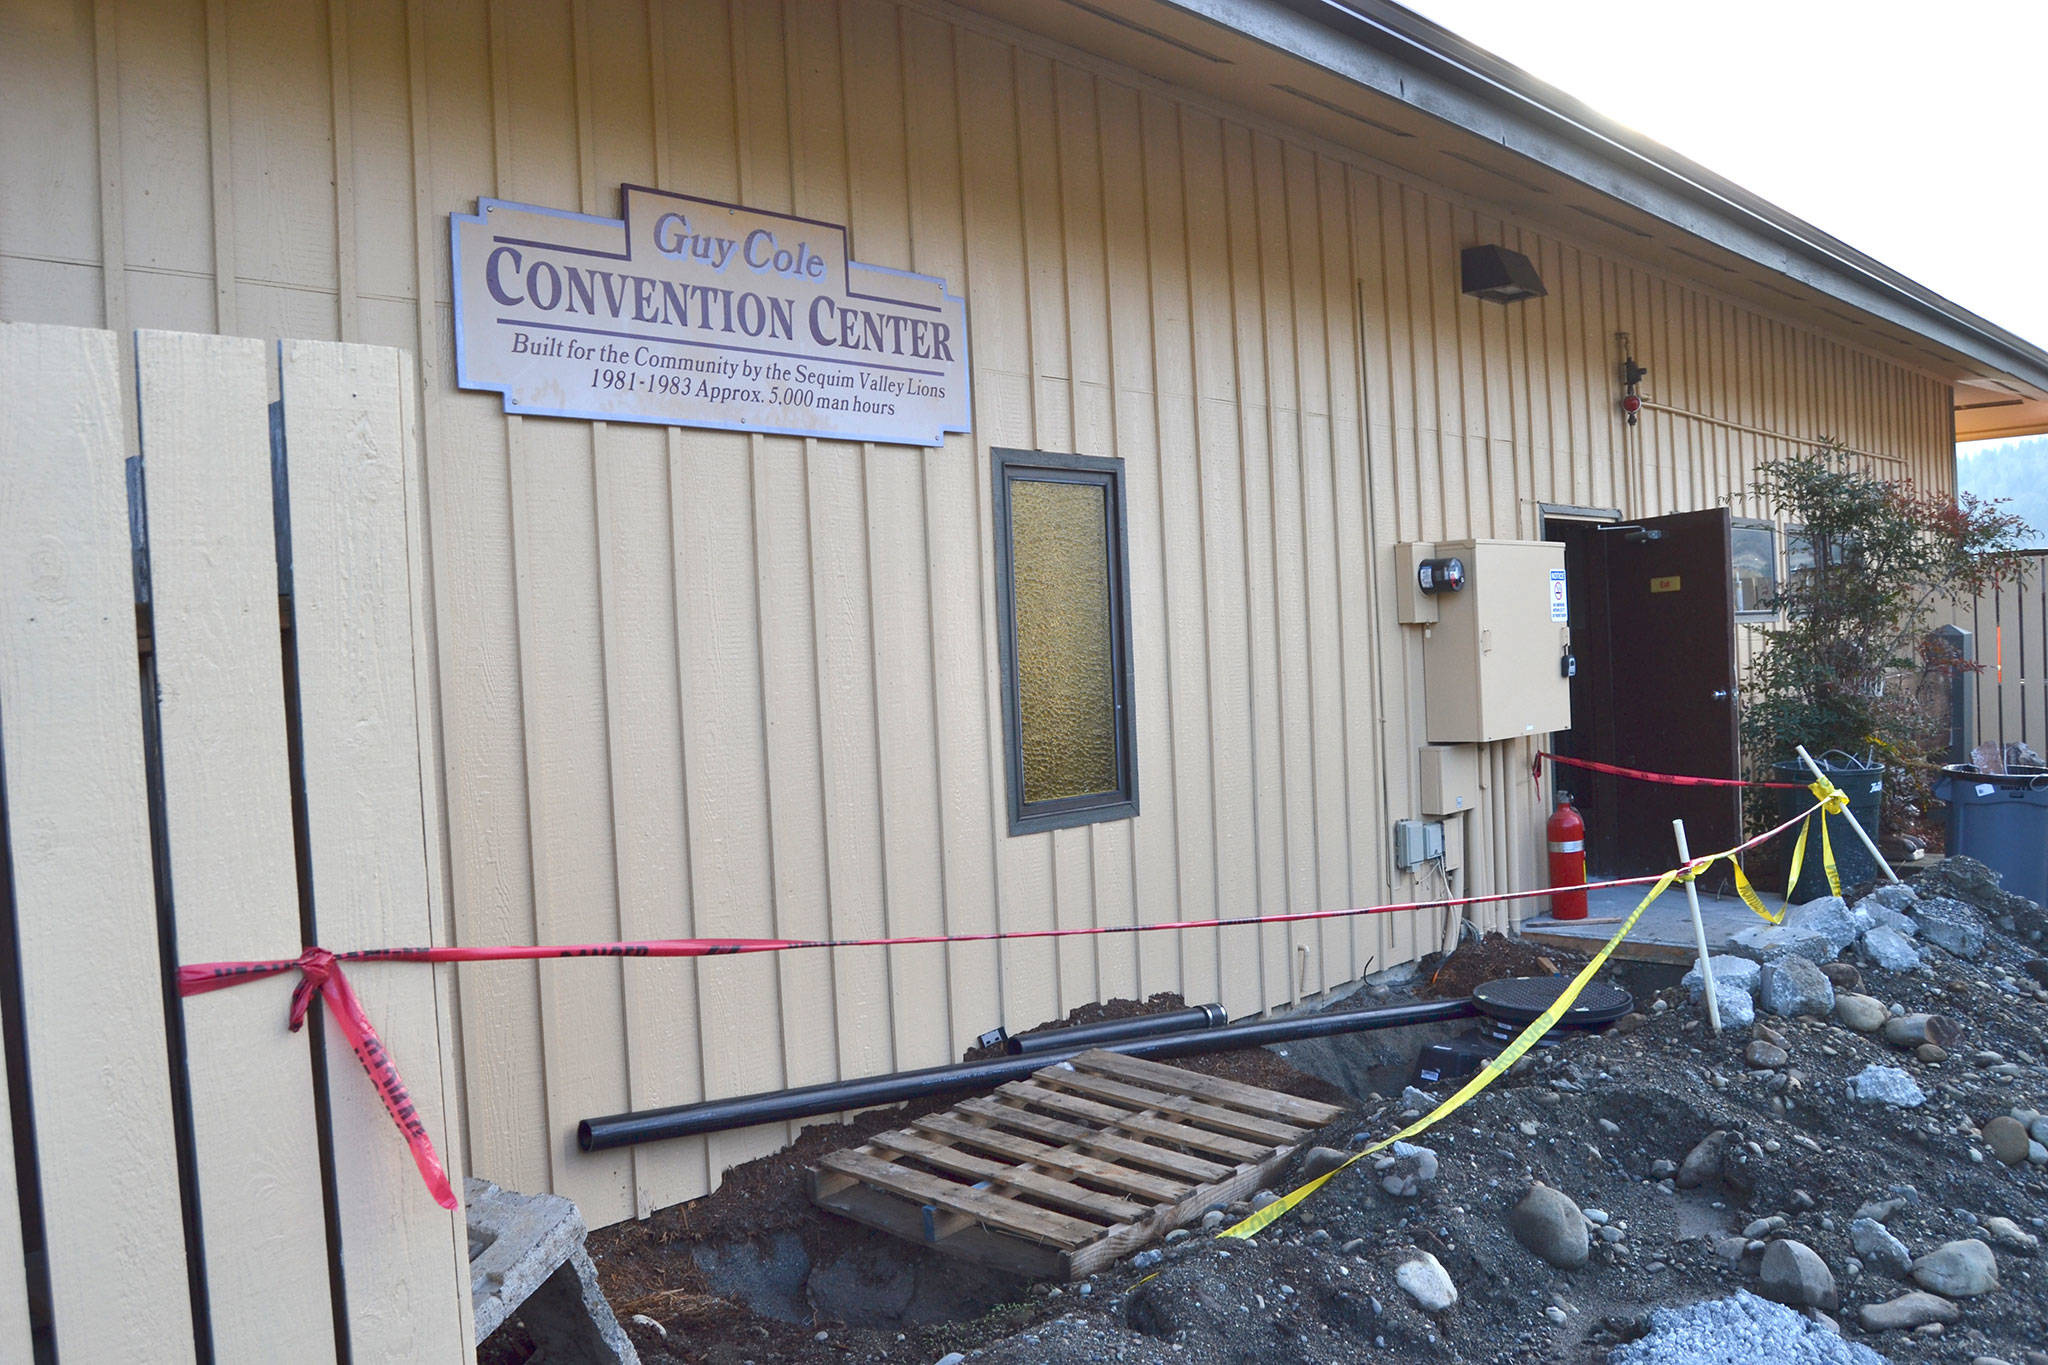 Sequim City Council members have been asked to consider changing the name of the Guy Cole Convention Center as a way to promote it better. Matthew Nash/Olympic Peninsula News Group